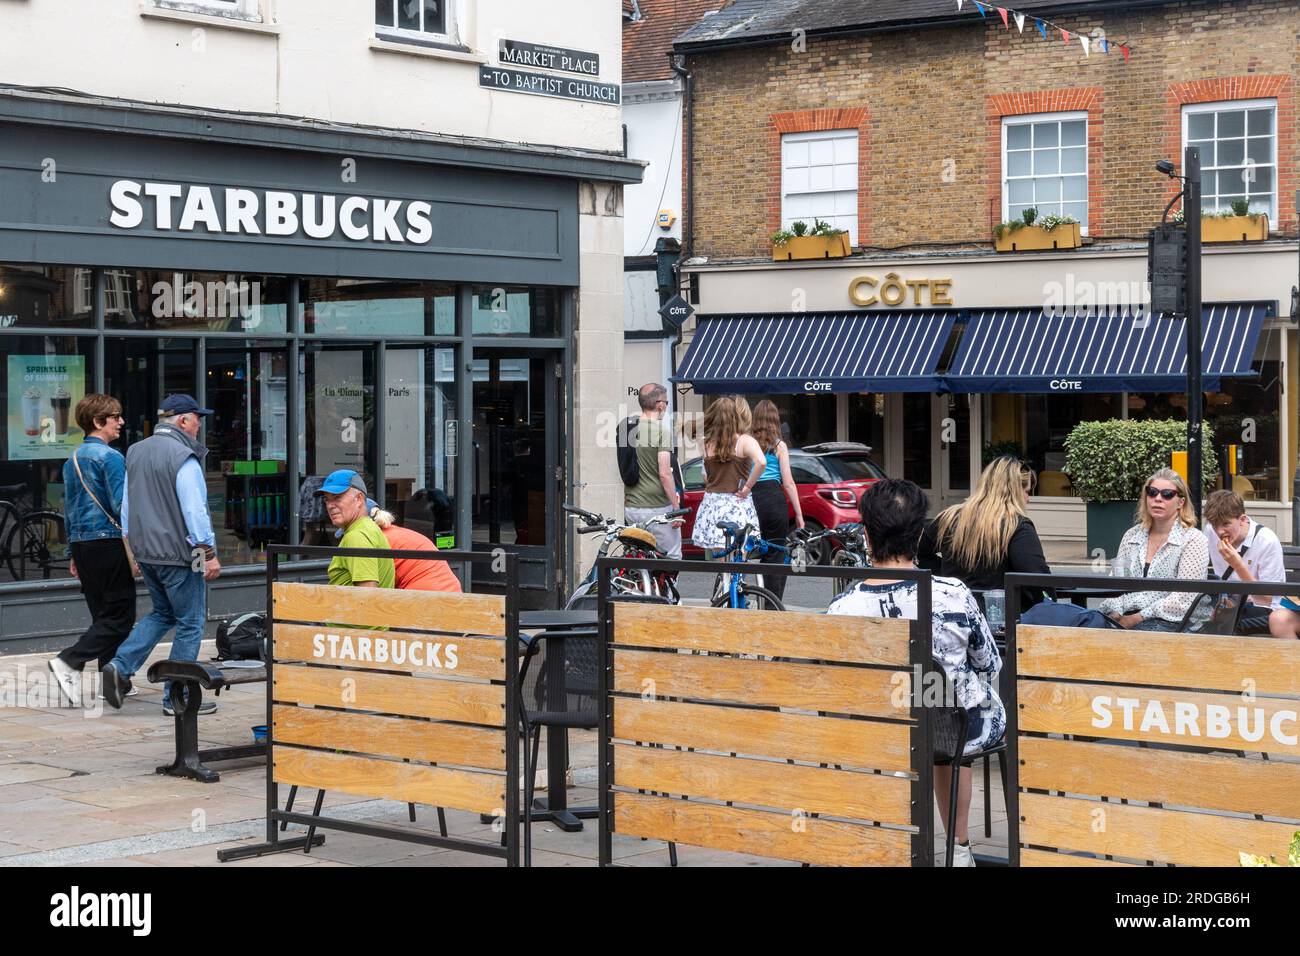 People sitting outside Starbucks coffee shop having drinks in Henley-on-Thames town centre, Oxfordshire, England, UK Stock Photo